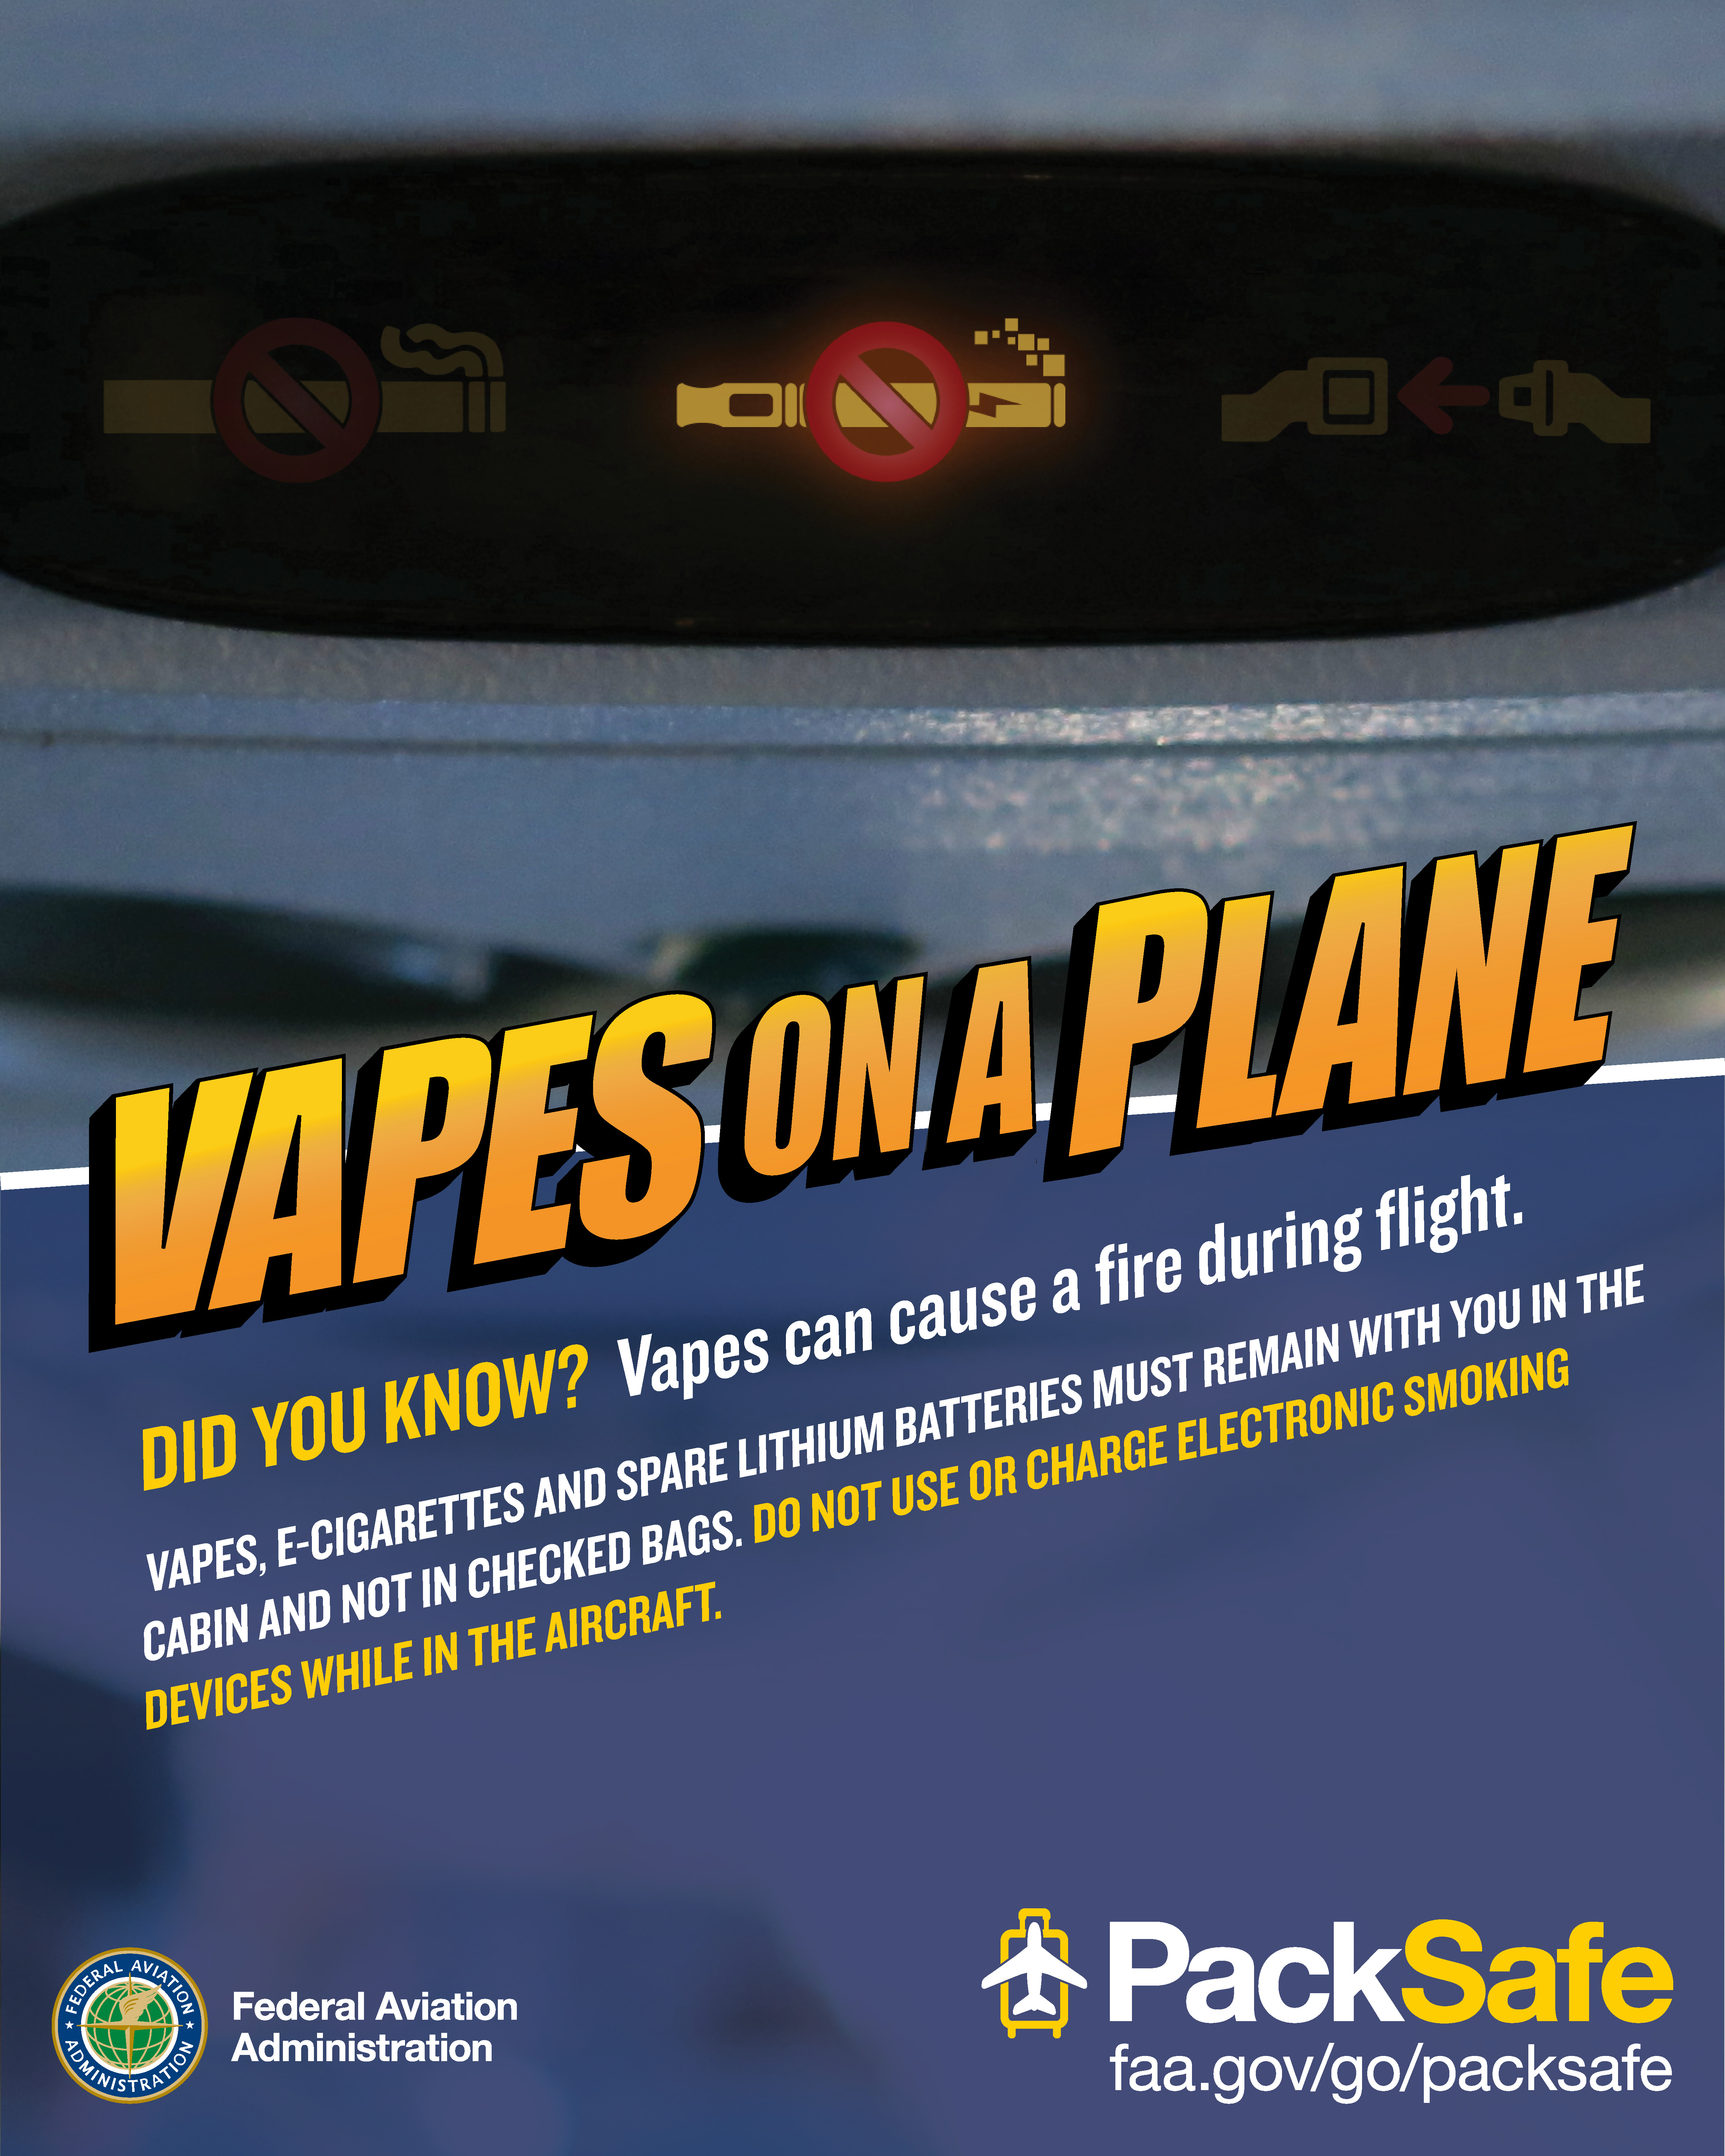 Vapes on a plane facts from the FAA